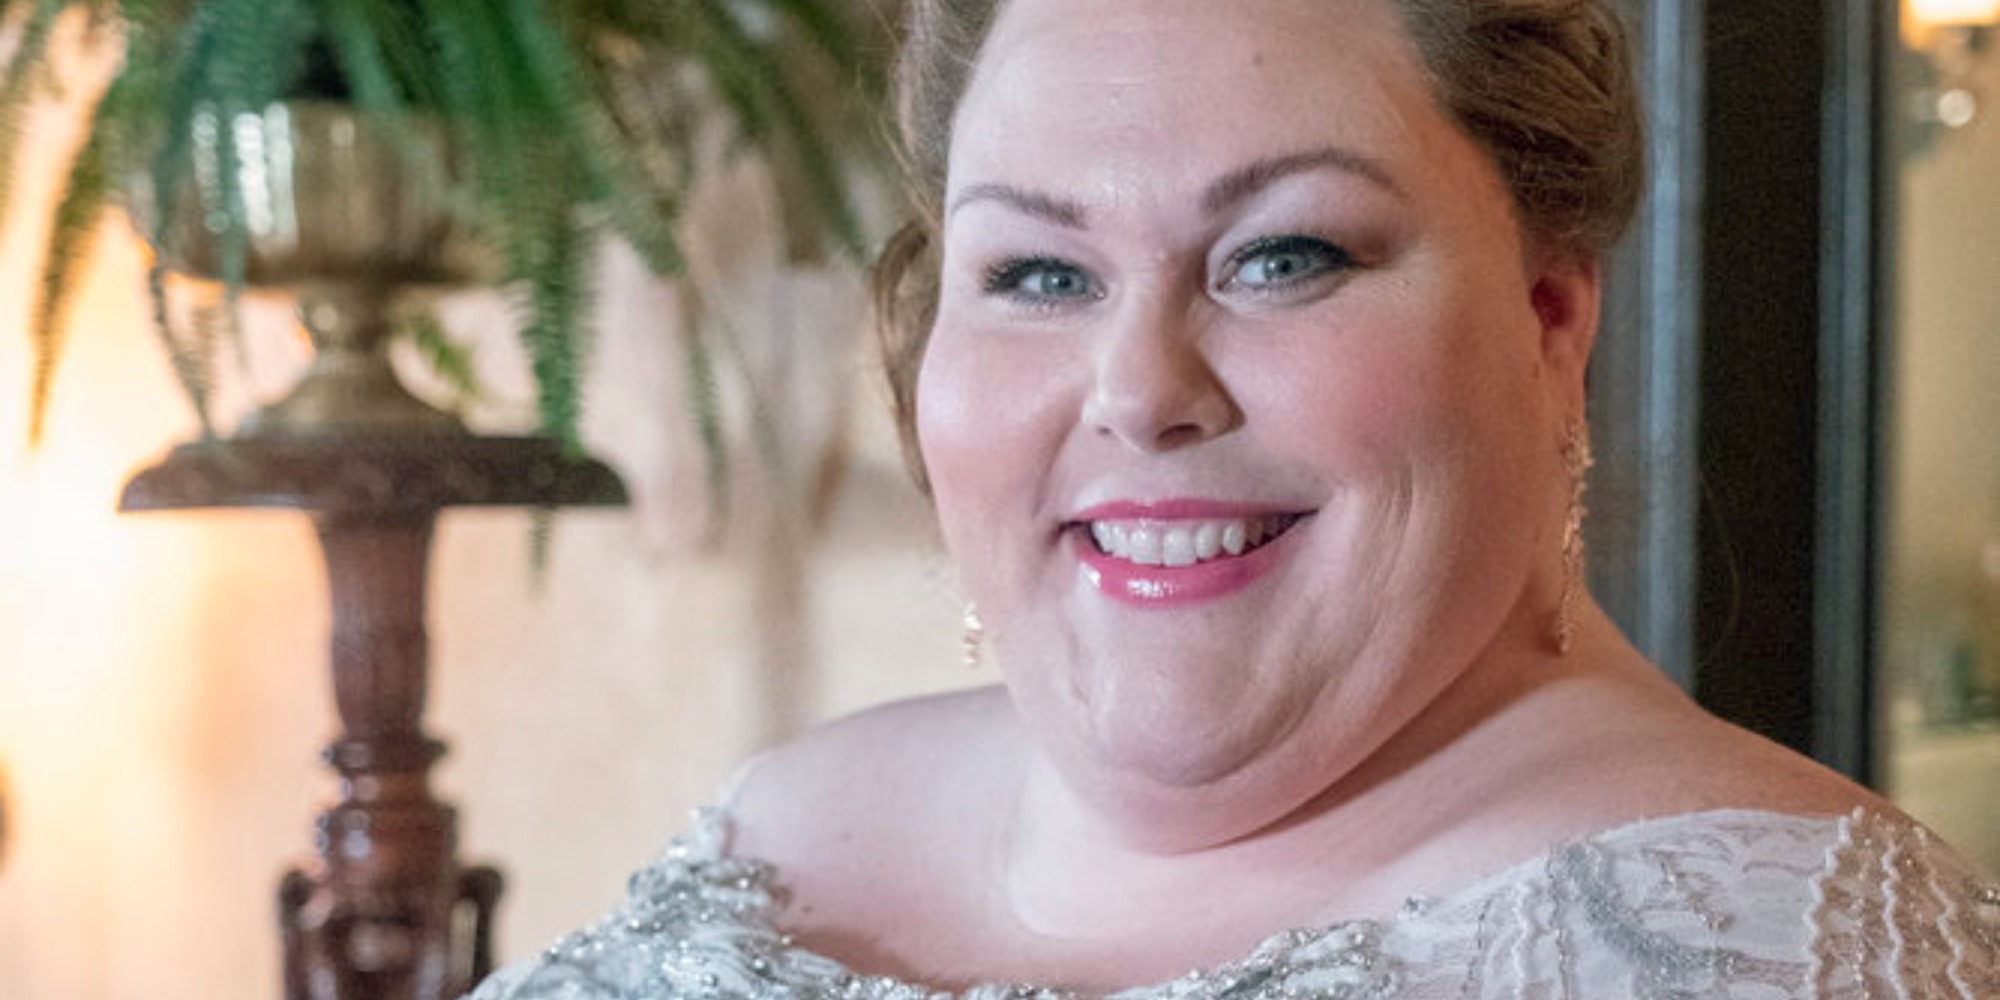 Chrissy Metz during her wedding to Phillip on This Is Us.